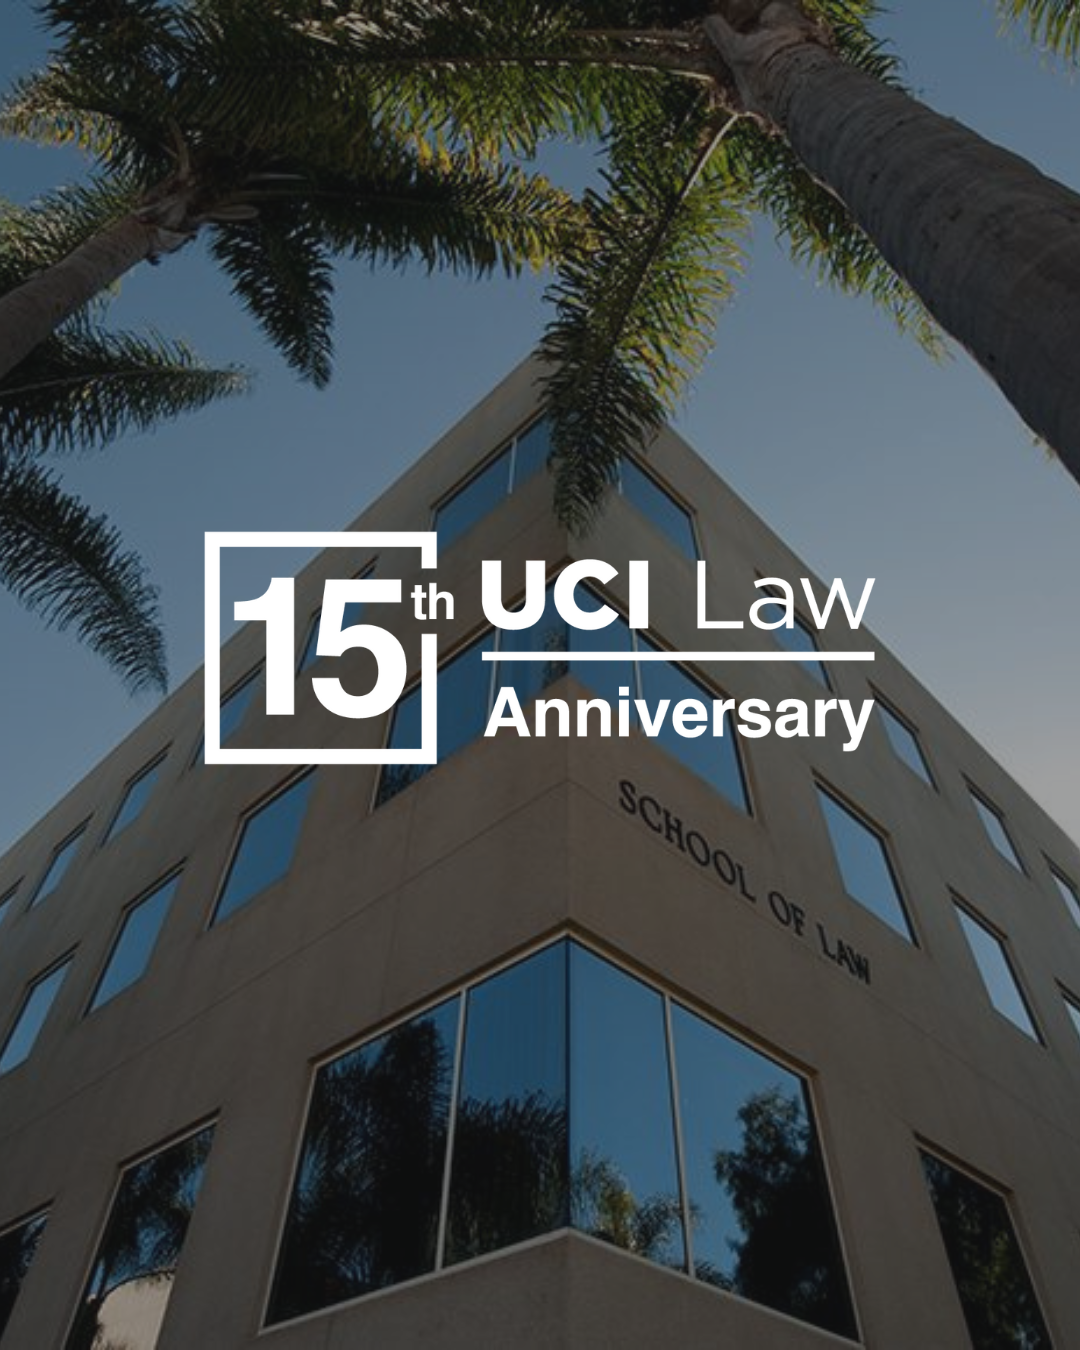 Profiles in Excellence: Reflections on UCI Law’s 15th Anniversary